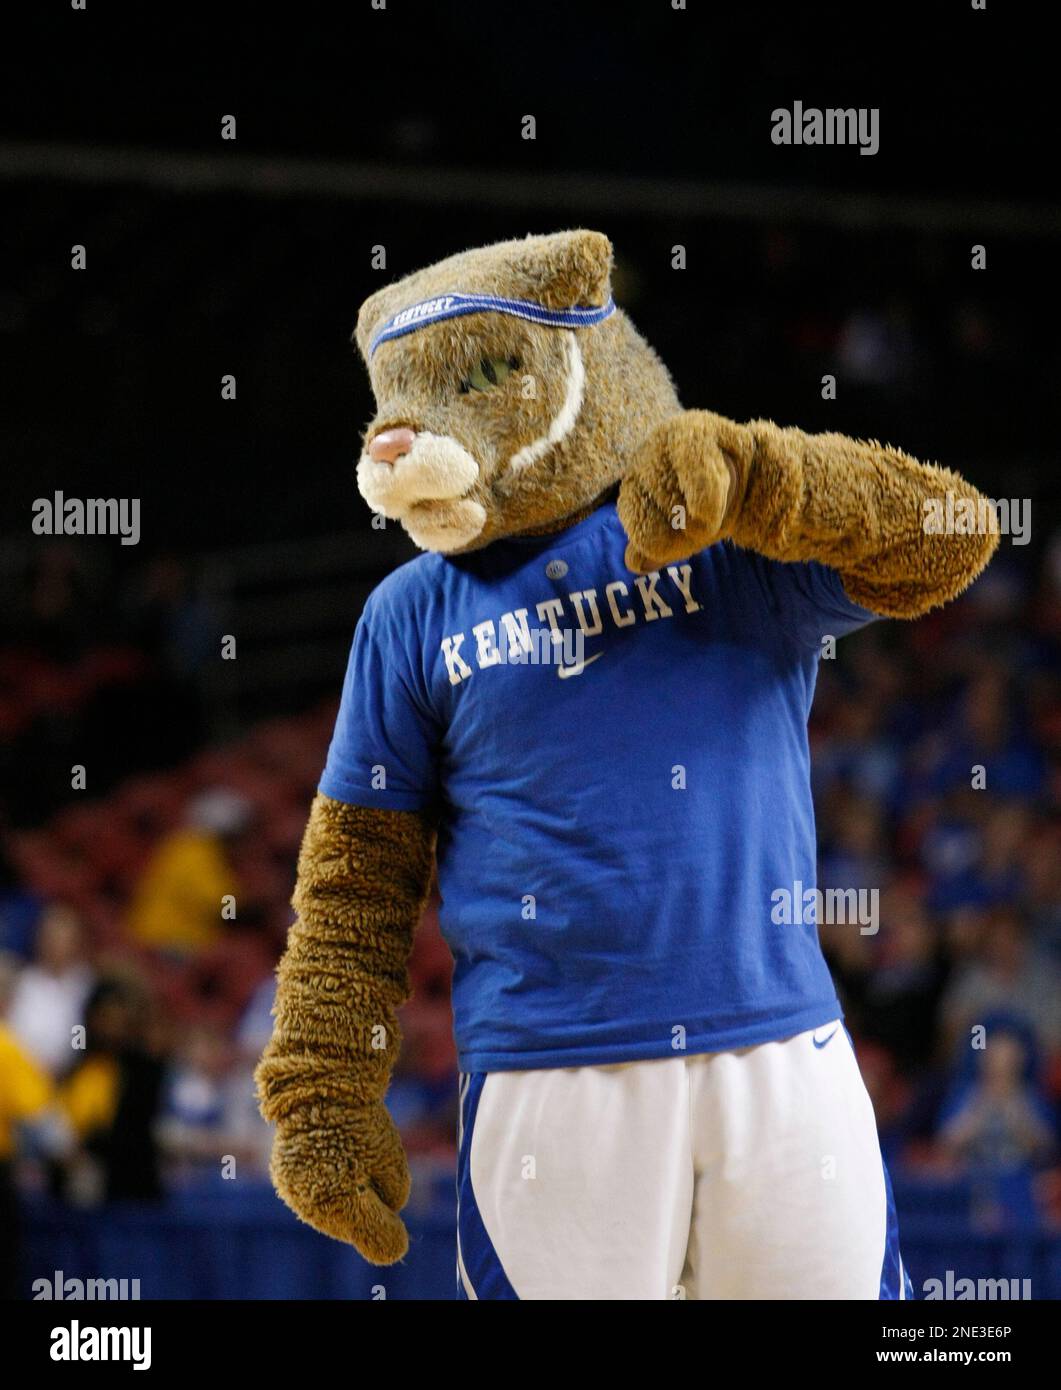 November 25, 2017; Memphis, TN, USA; Memphis Tigers Mascot, POUNCER, and  cheerleaders performing during an intermission in NCAA D1 basketball action  against NKU. The Memphis Tigers defeated the Northern Kentucky Norse, 76-74.